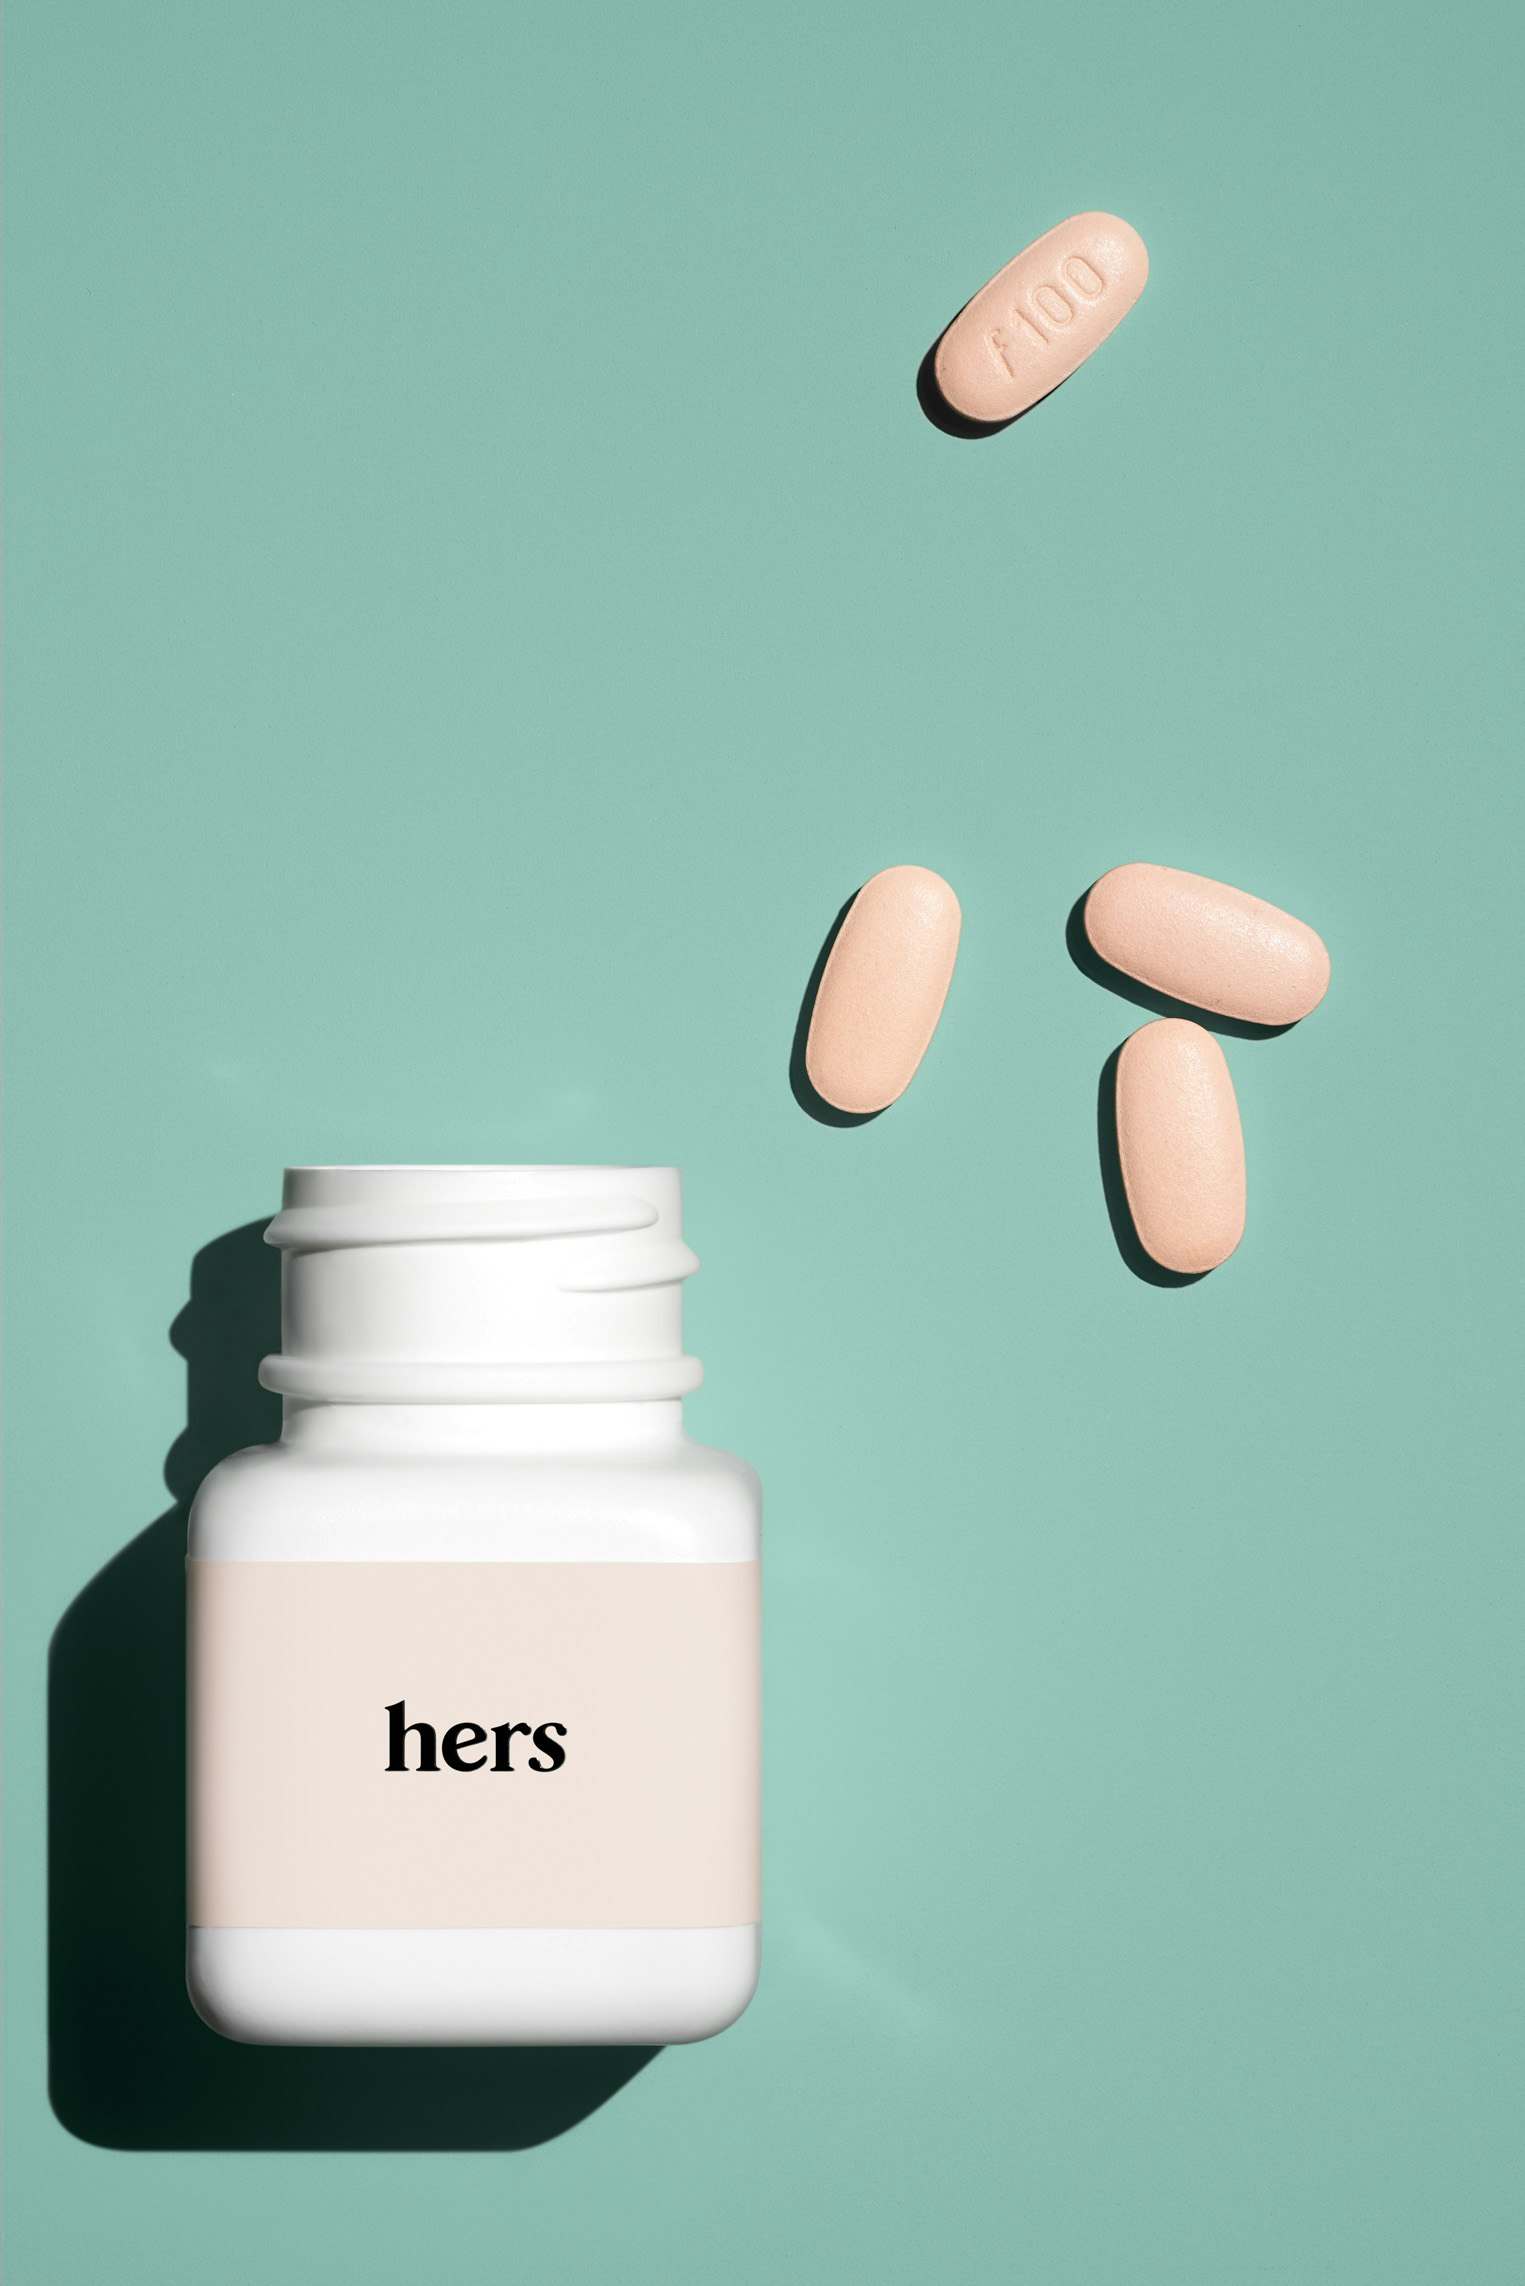 Hers for Women's Health